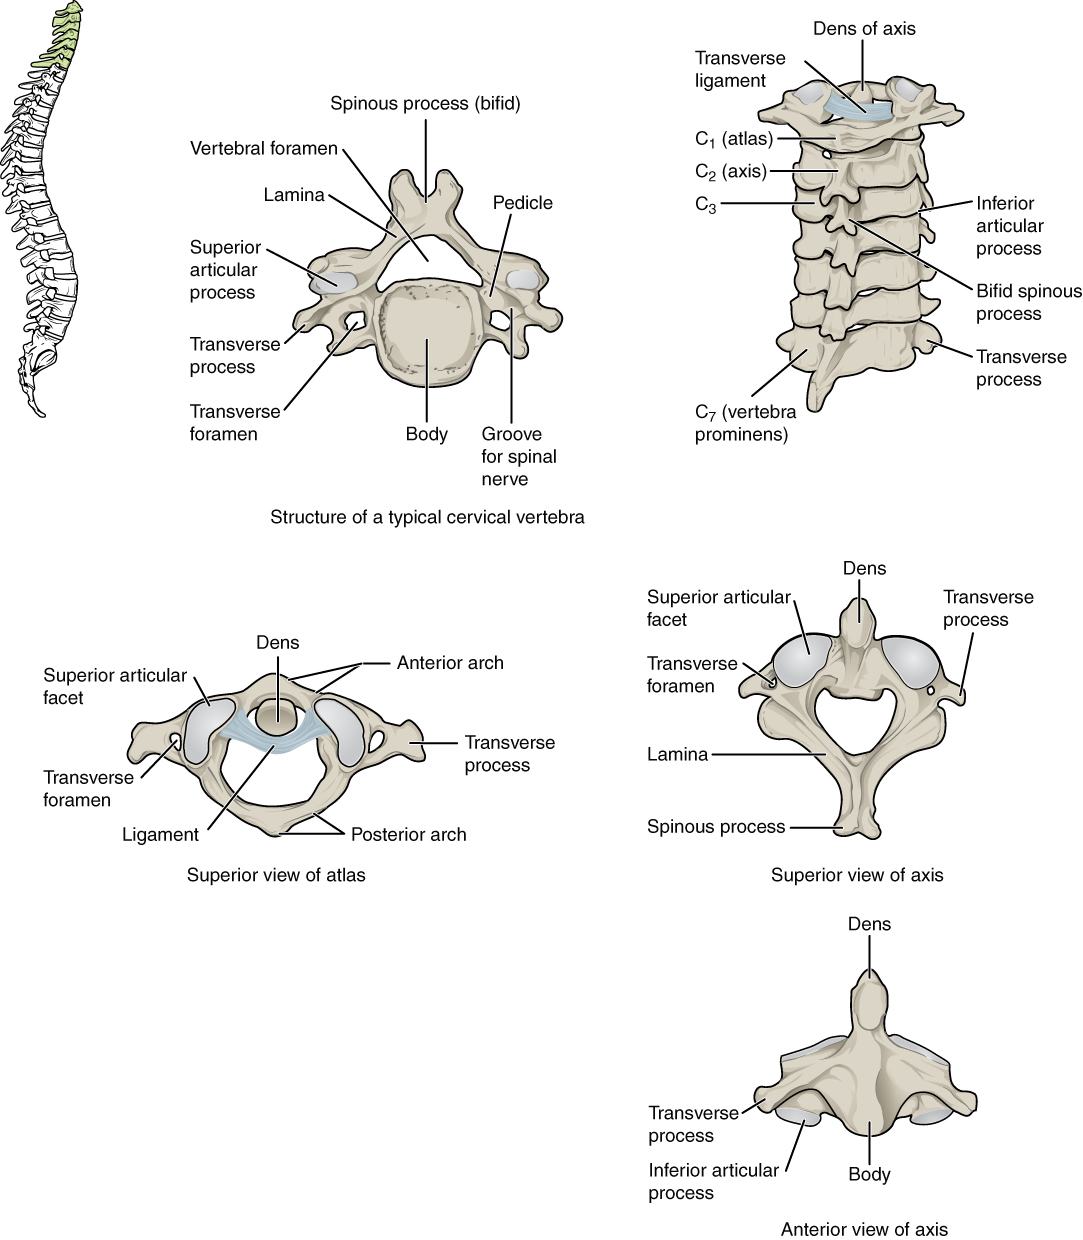 This figure shows the structure of the cervical vertebrae. The left panel shows the location of the cervical vertebrae in green along the vertebral column. The middle panel shows the structure of a typical cervical vertebra and the right panel shows the superior and anterior view of the axis.